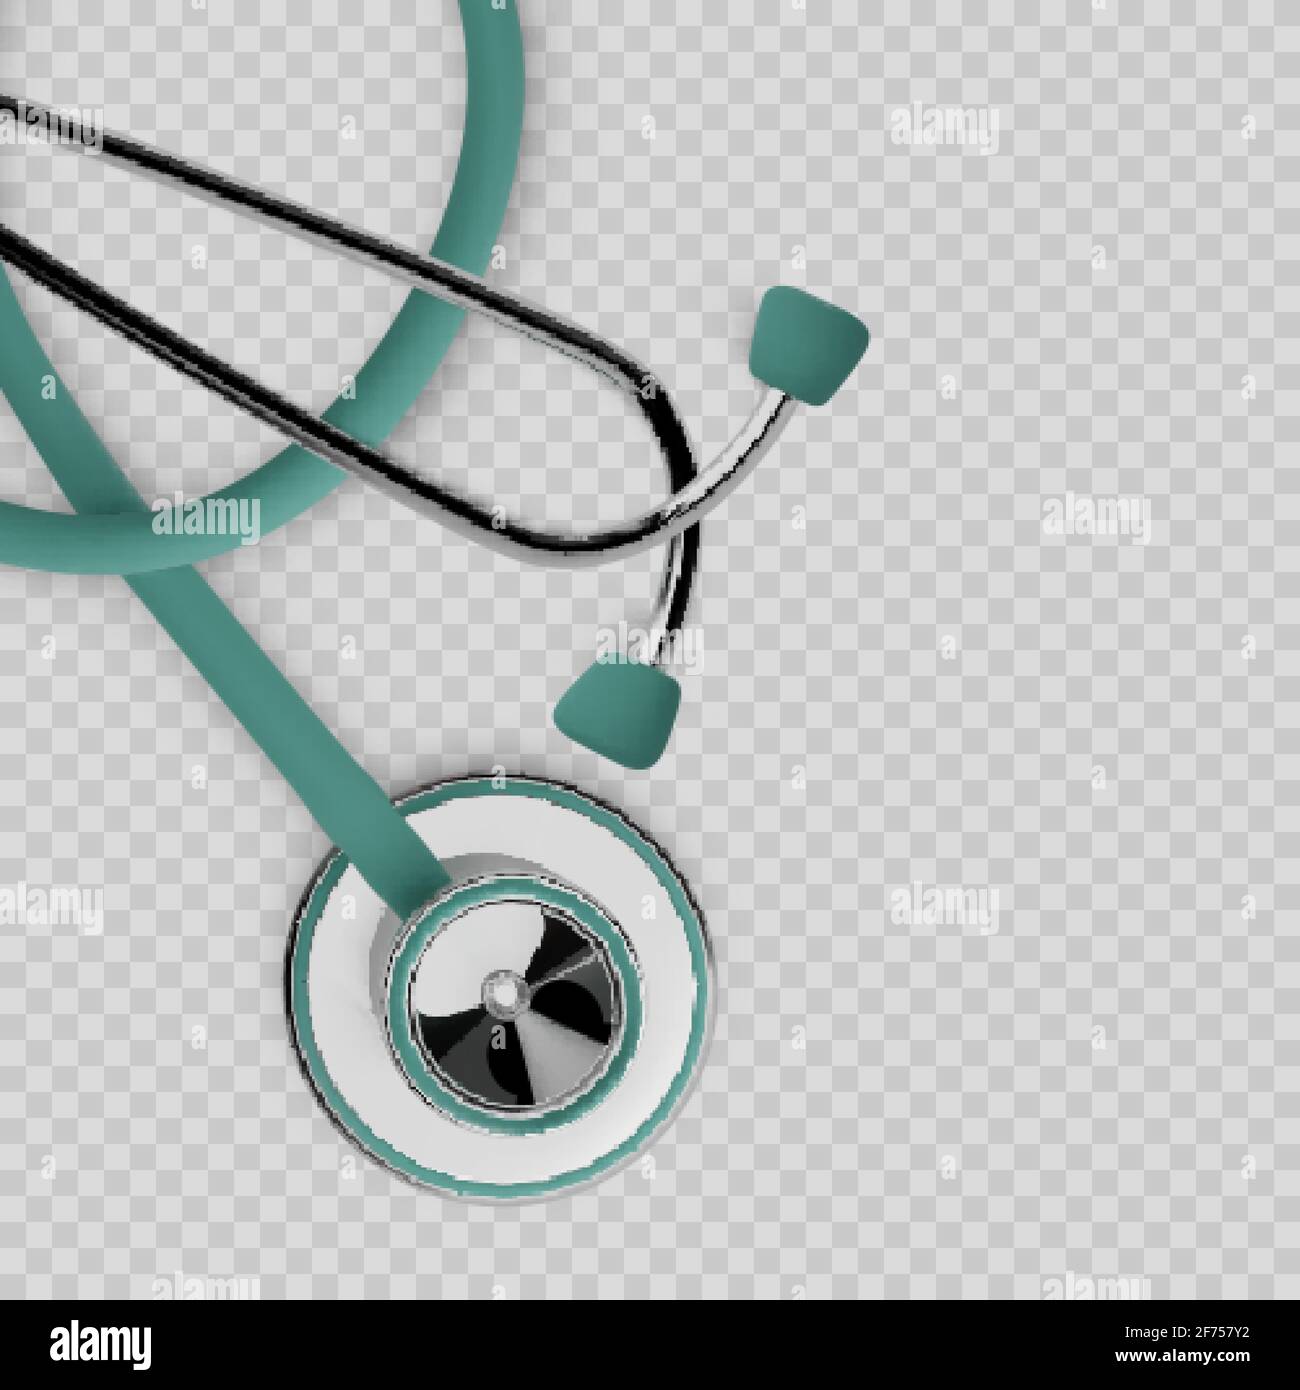 Stothoscope 3d render. Medical equipment. Diagnostics of heart and lung health. Health care banner concept. Vector isolated on transparent background Stock Vector